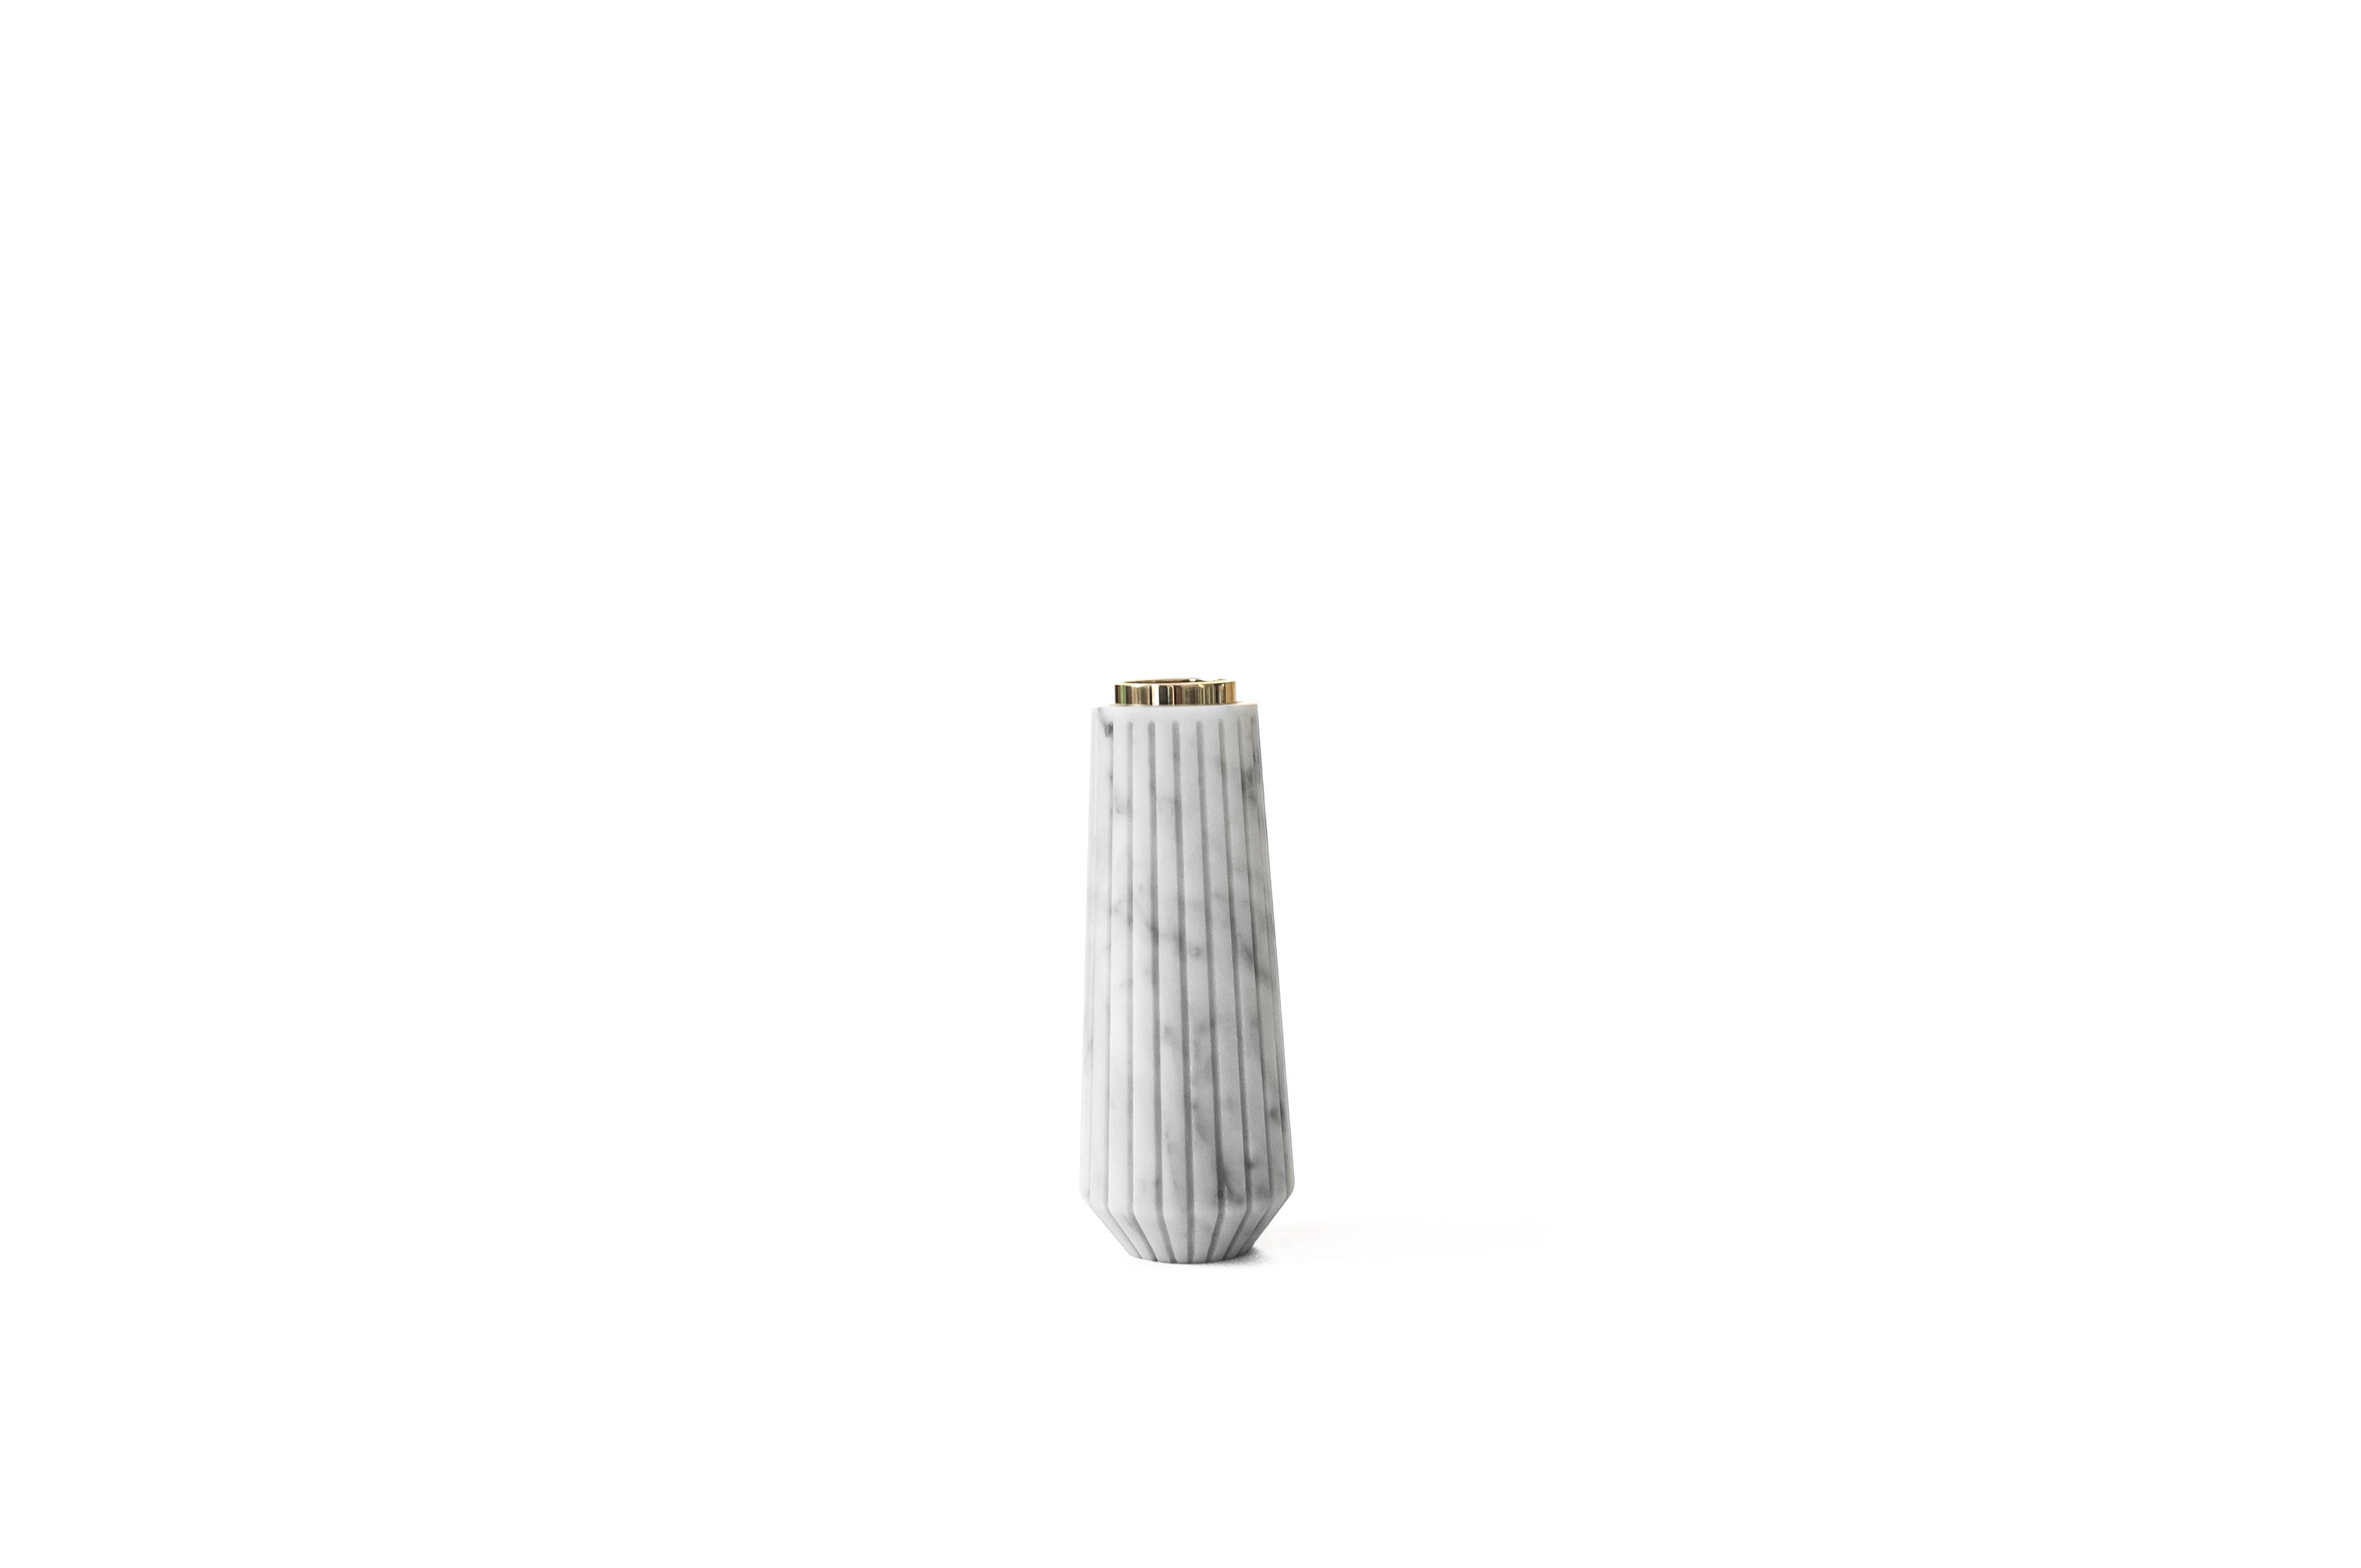 Striped candle holder in white Carrara marble and small or big brass.

Each piece is in a way unique (every marble block is different in veins and shades) and handmade by Italian artisans specialized over generations in processing marble. Slight